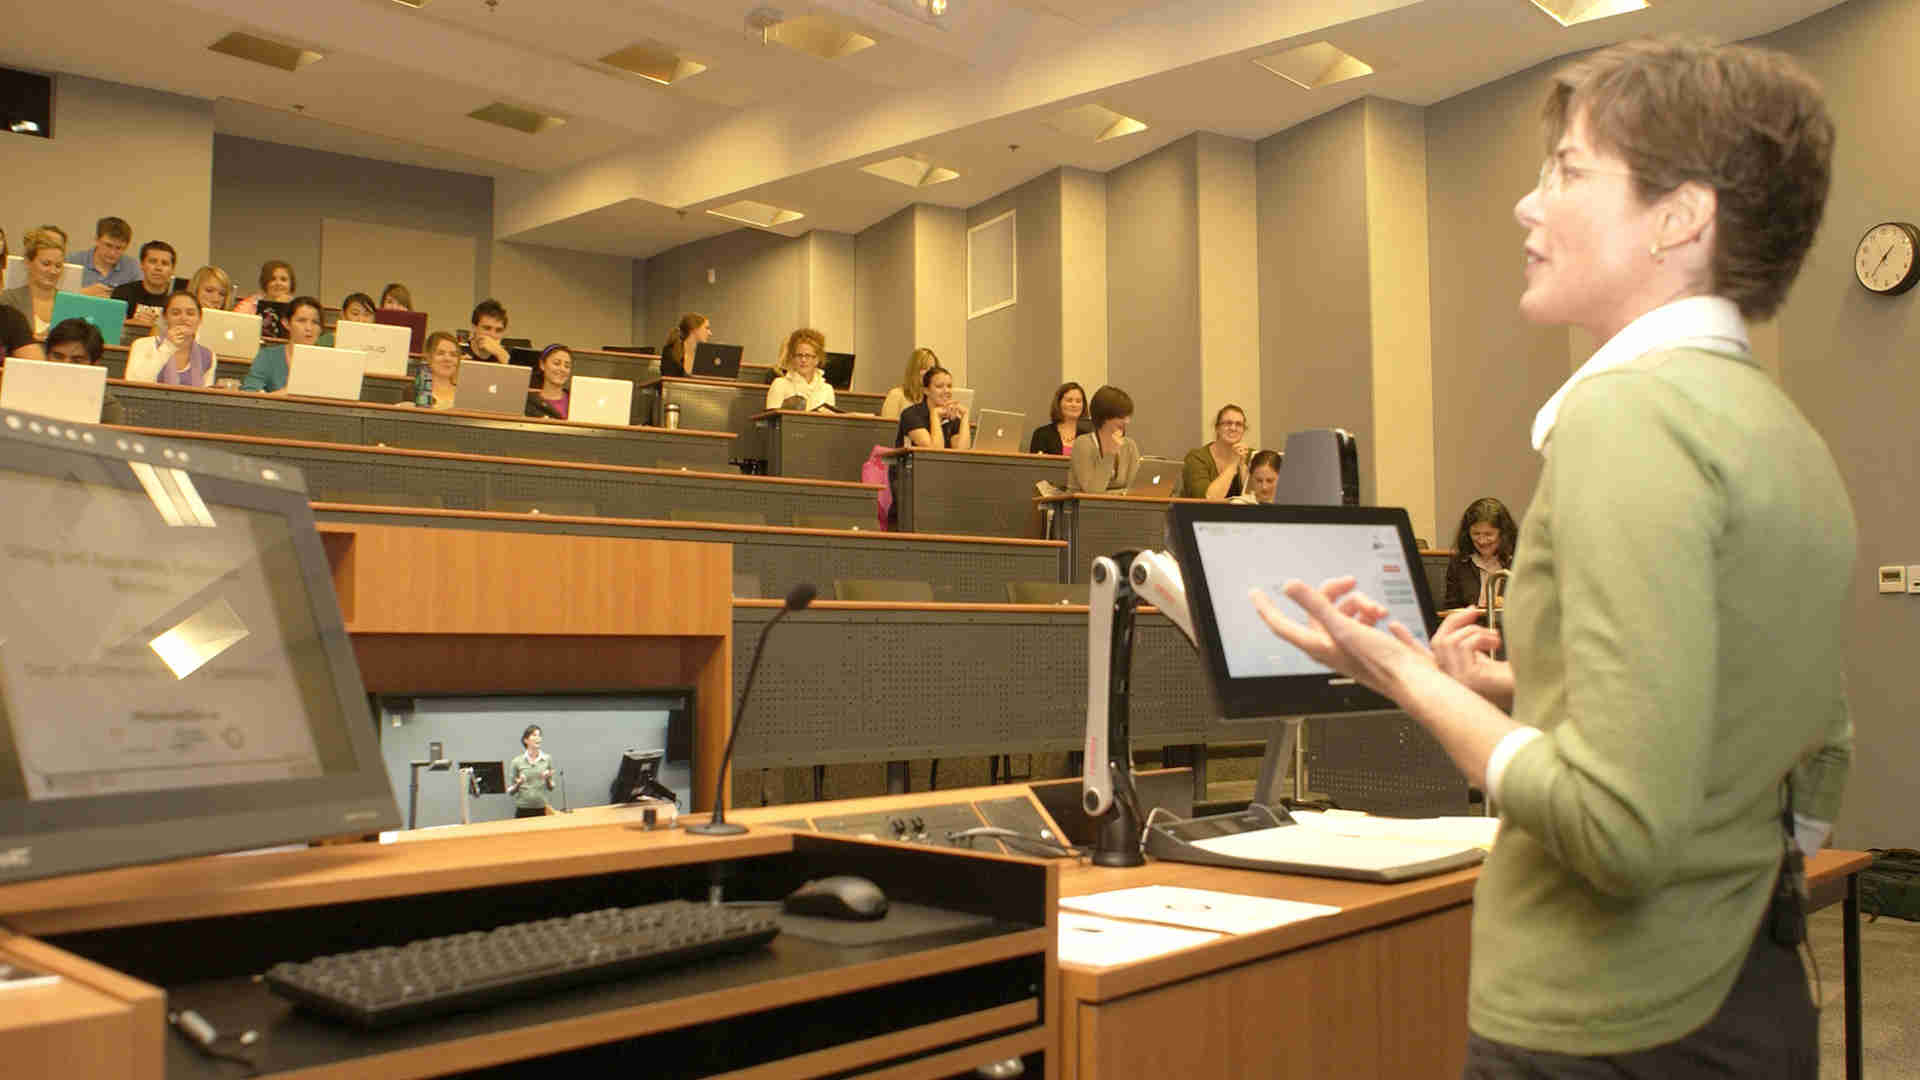 Lecture Hall - Unified Communications and Collaboration - Engineering Harmonics